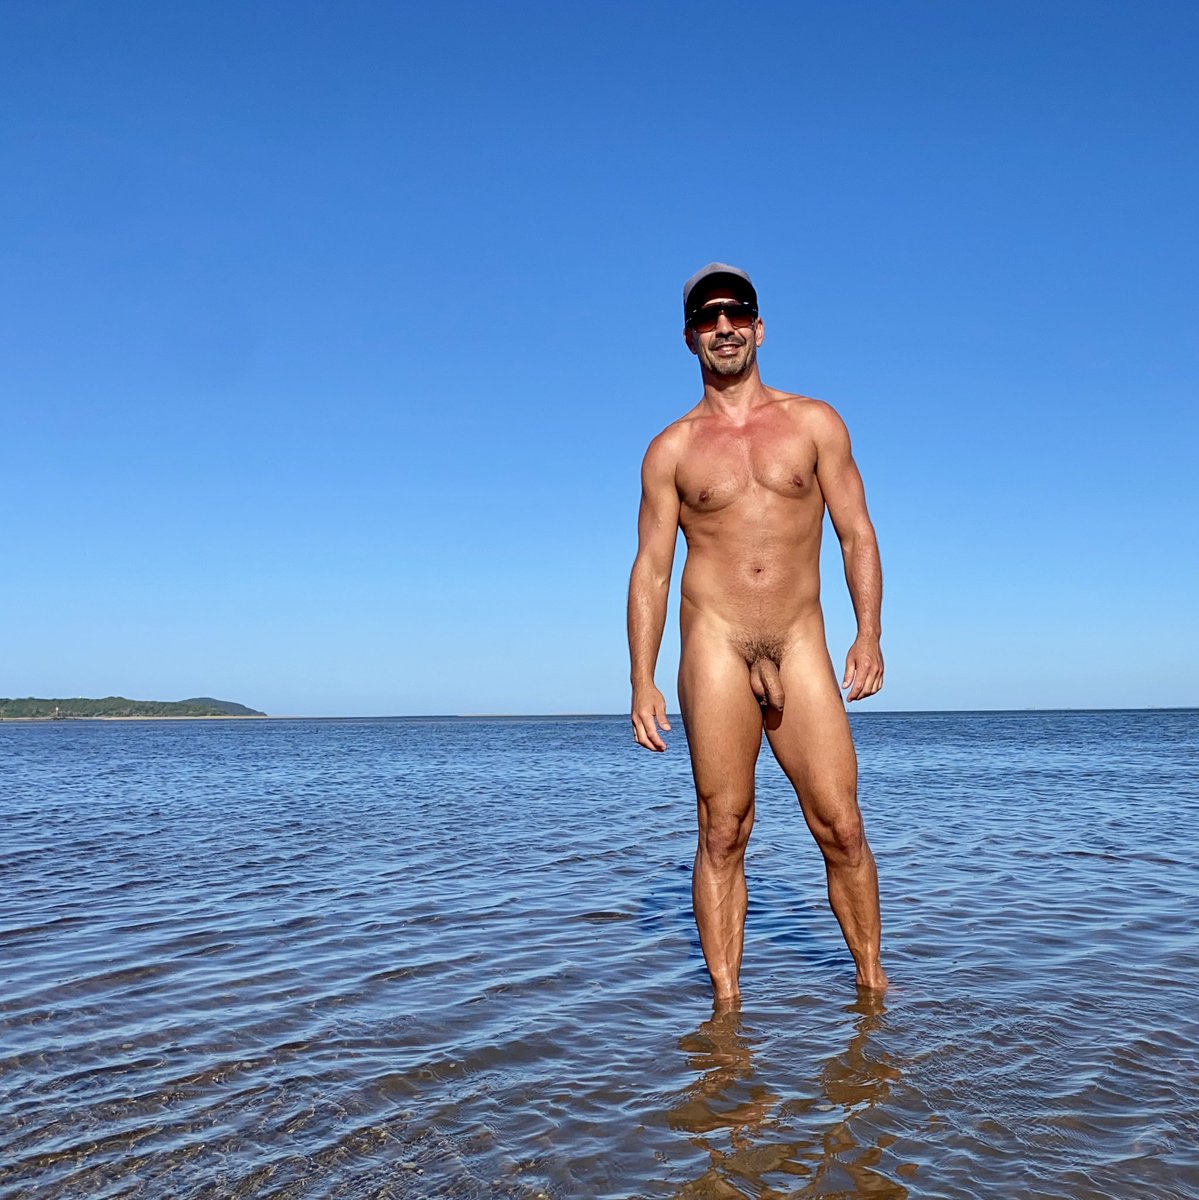 In the latest episode of Naked Men Talking we're joined Damien from @barebeachboys. We talk growing up in a relaxed household, navigating the body-image challenges of a dance career, the allure of naked beaches, and why he doesn't have a bucket-list. buff.ly/3y0a063